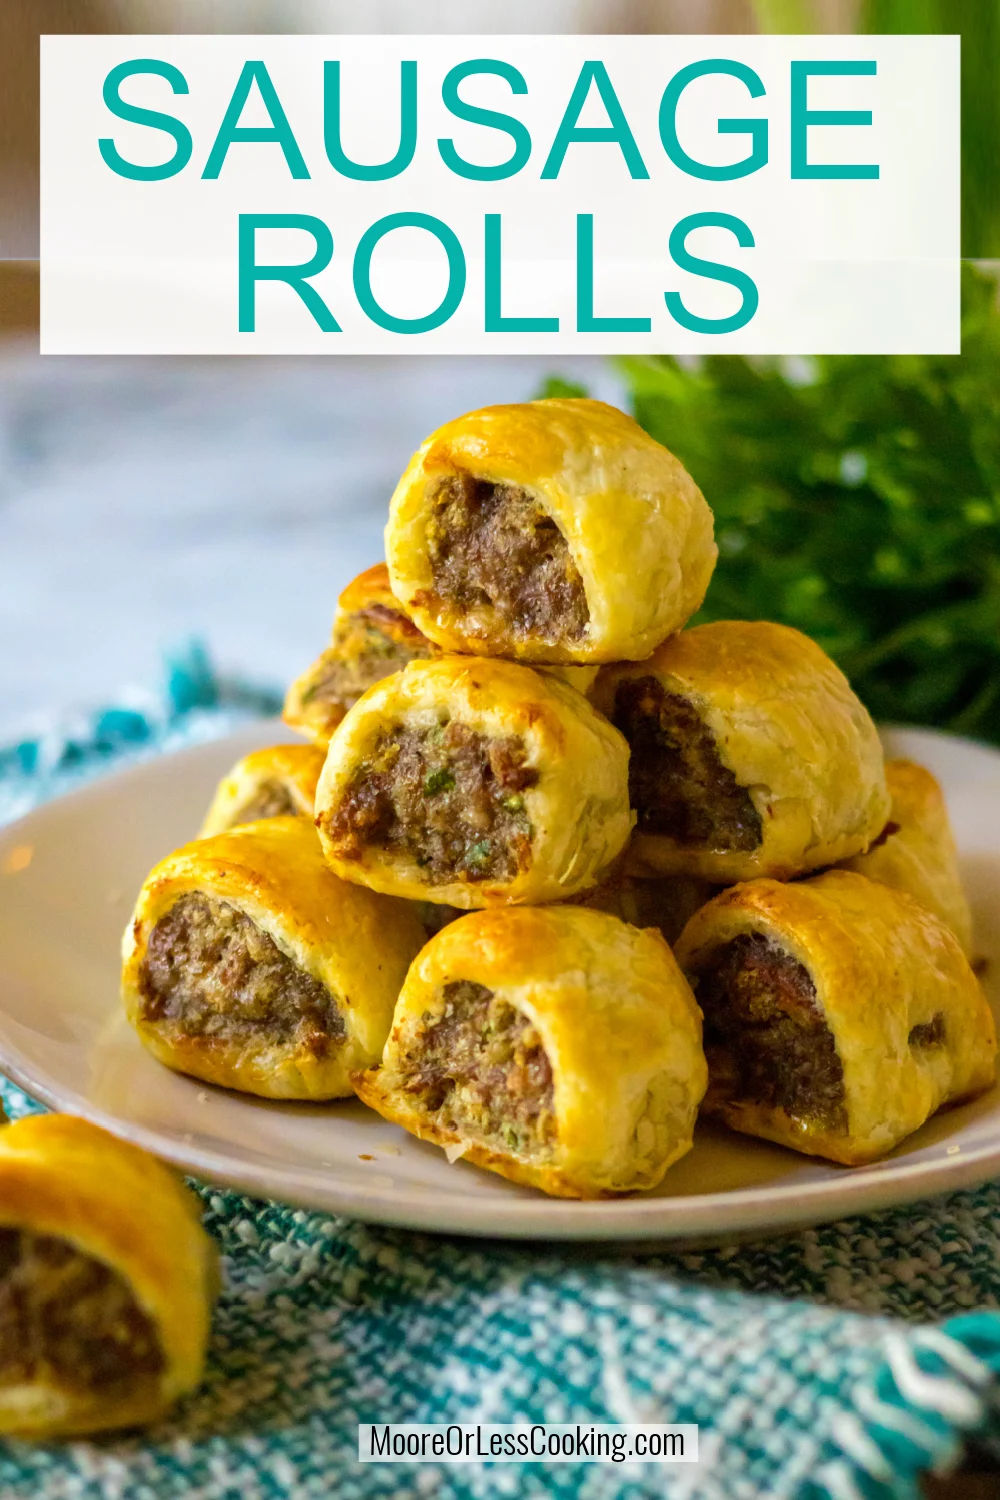 Wrapped in a puff pastry and baked to flaky and golden deliciousness, these scrumptious Sausage Rolls are always a crowd-pleaser on an appetizer table. Puff pastry sheets are stuffed with a zesty bacon and sausage mixture and brushed with an egg wash before being baked to savory deliciousness. via @Mooreorlesscook